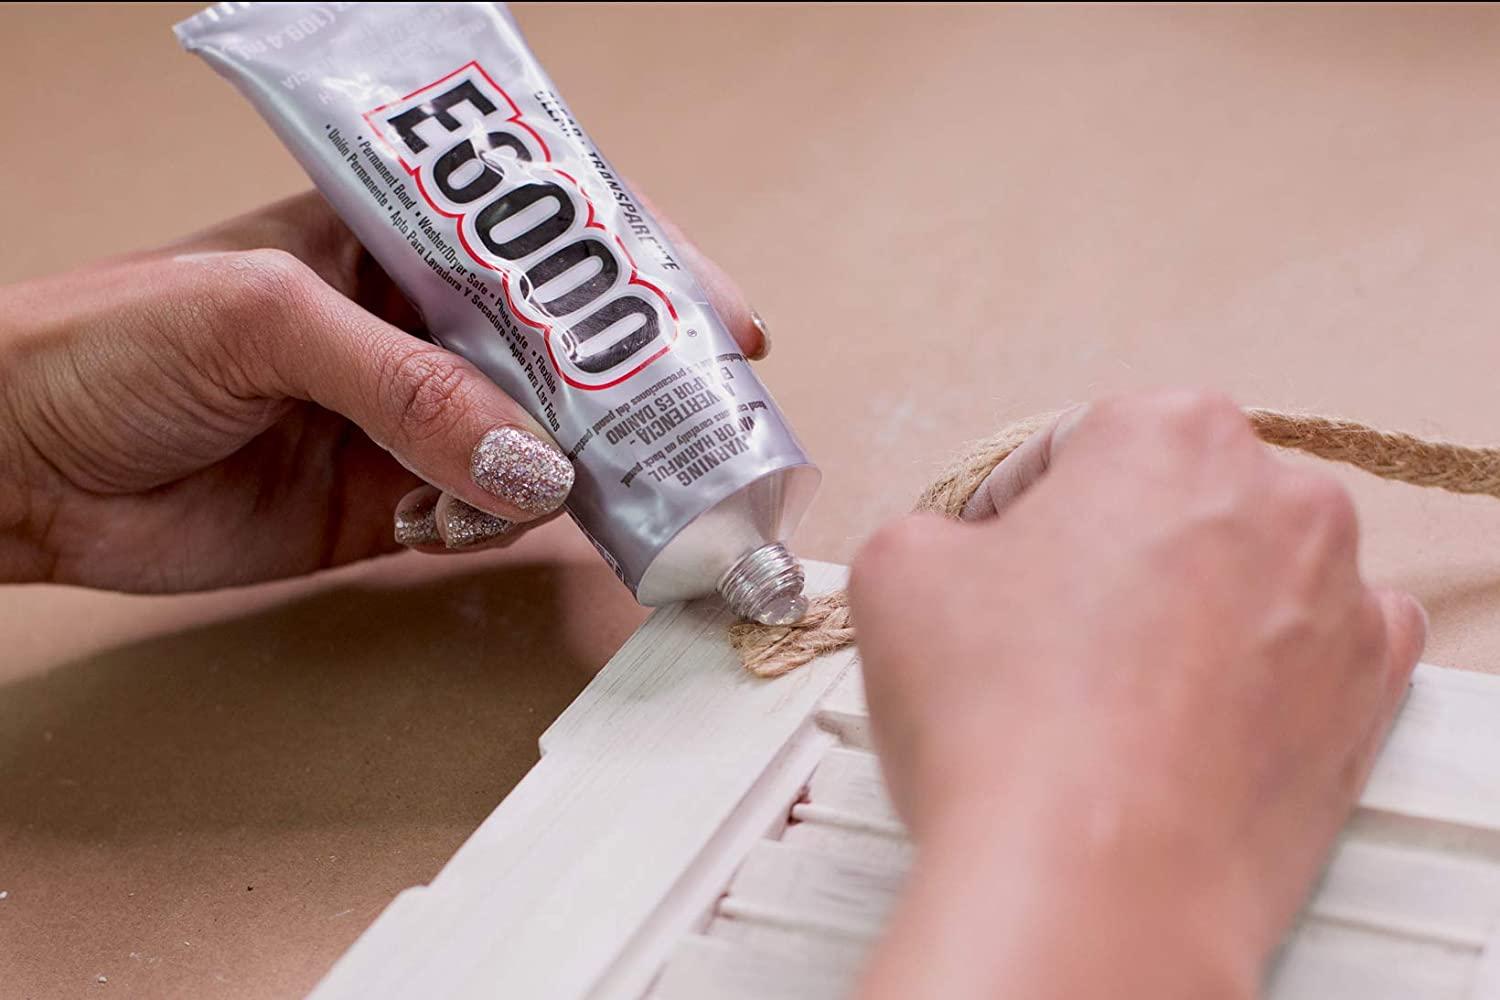 Eclectic E6000 Spray Adhesive Glue, Low Odor, Clear, 4 fl. oz